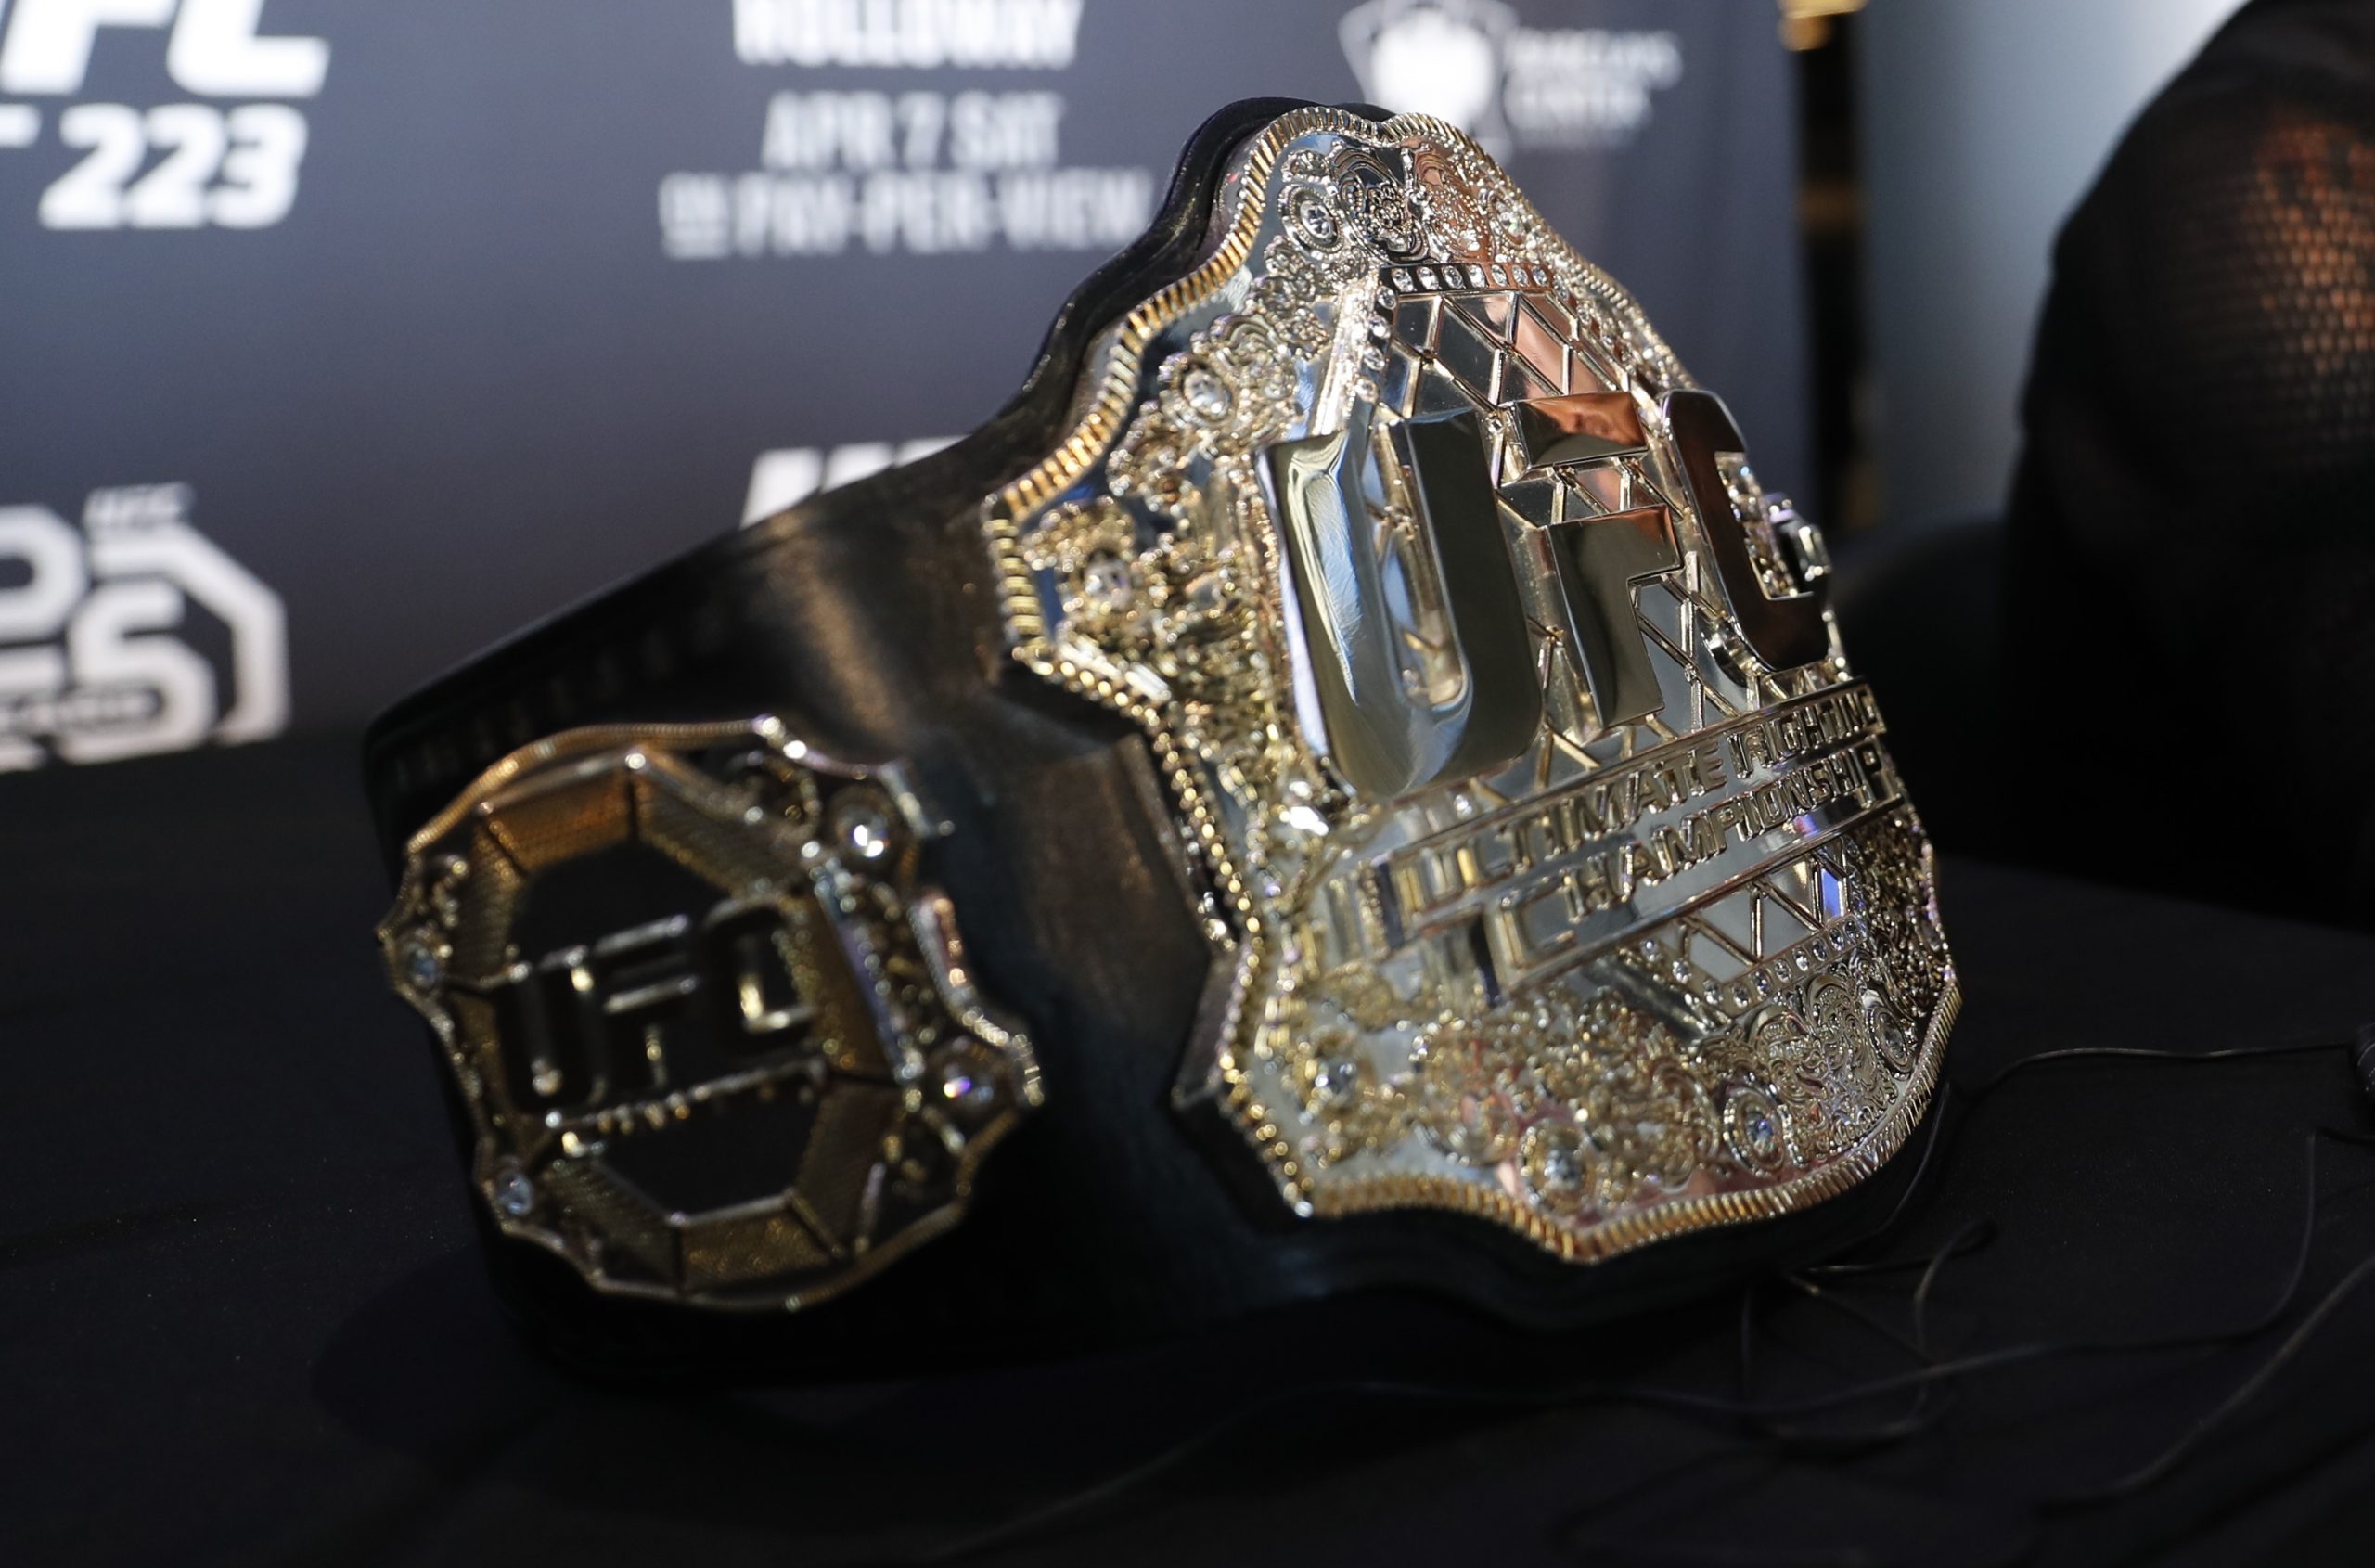 The best UFC 291 DFS picks and value plays for the Fight Night card include high priced options and underdogs that make good UFC DFS plays...